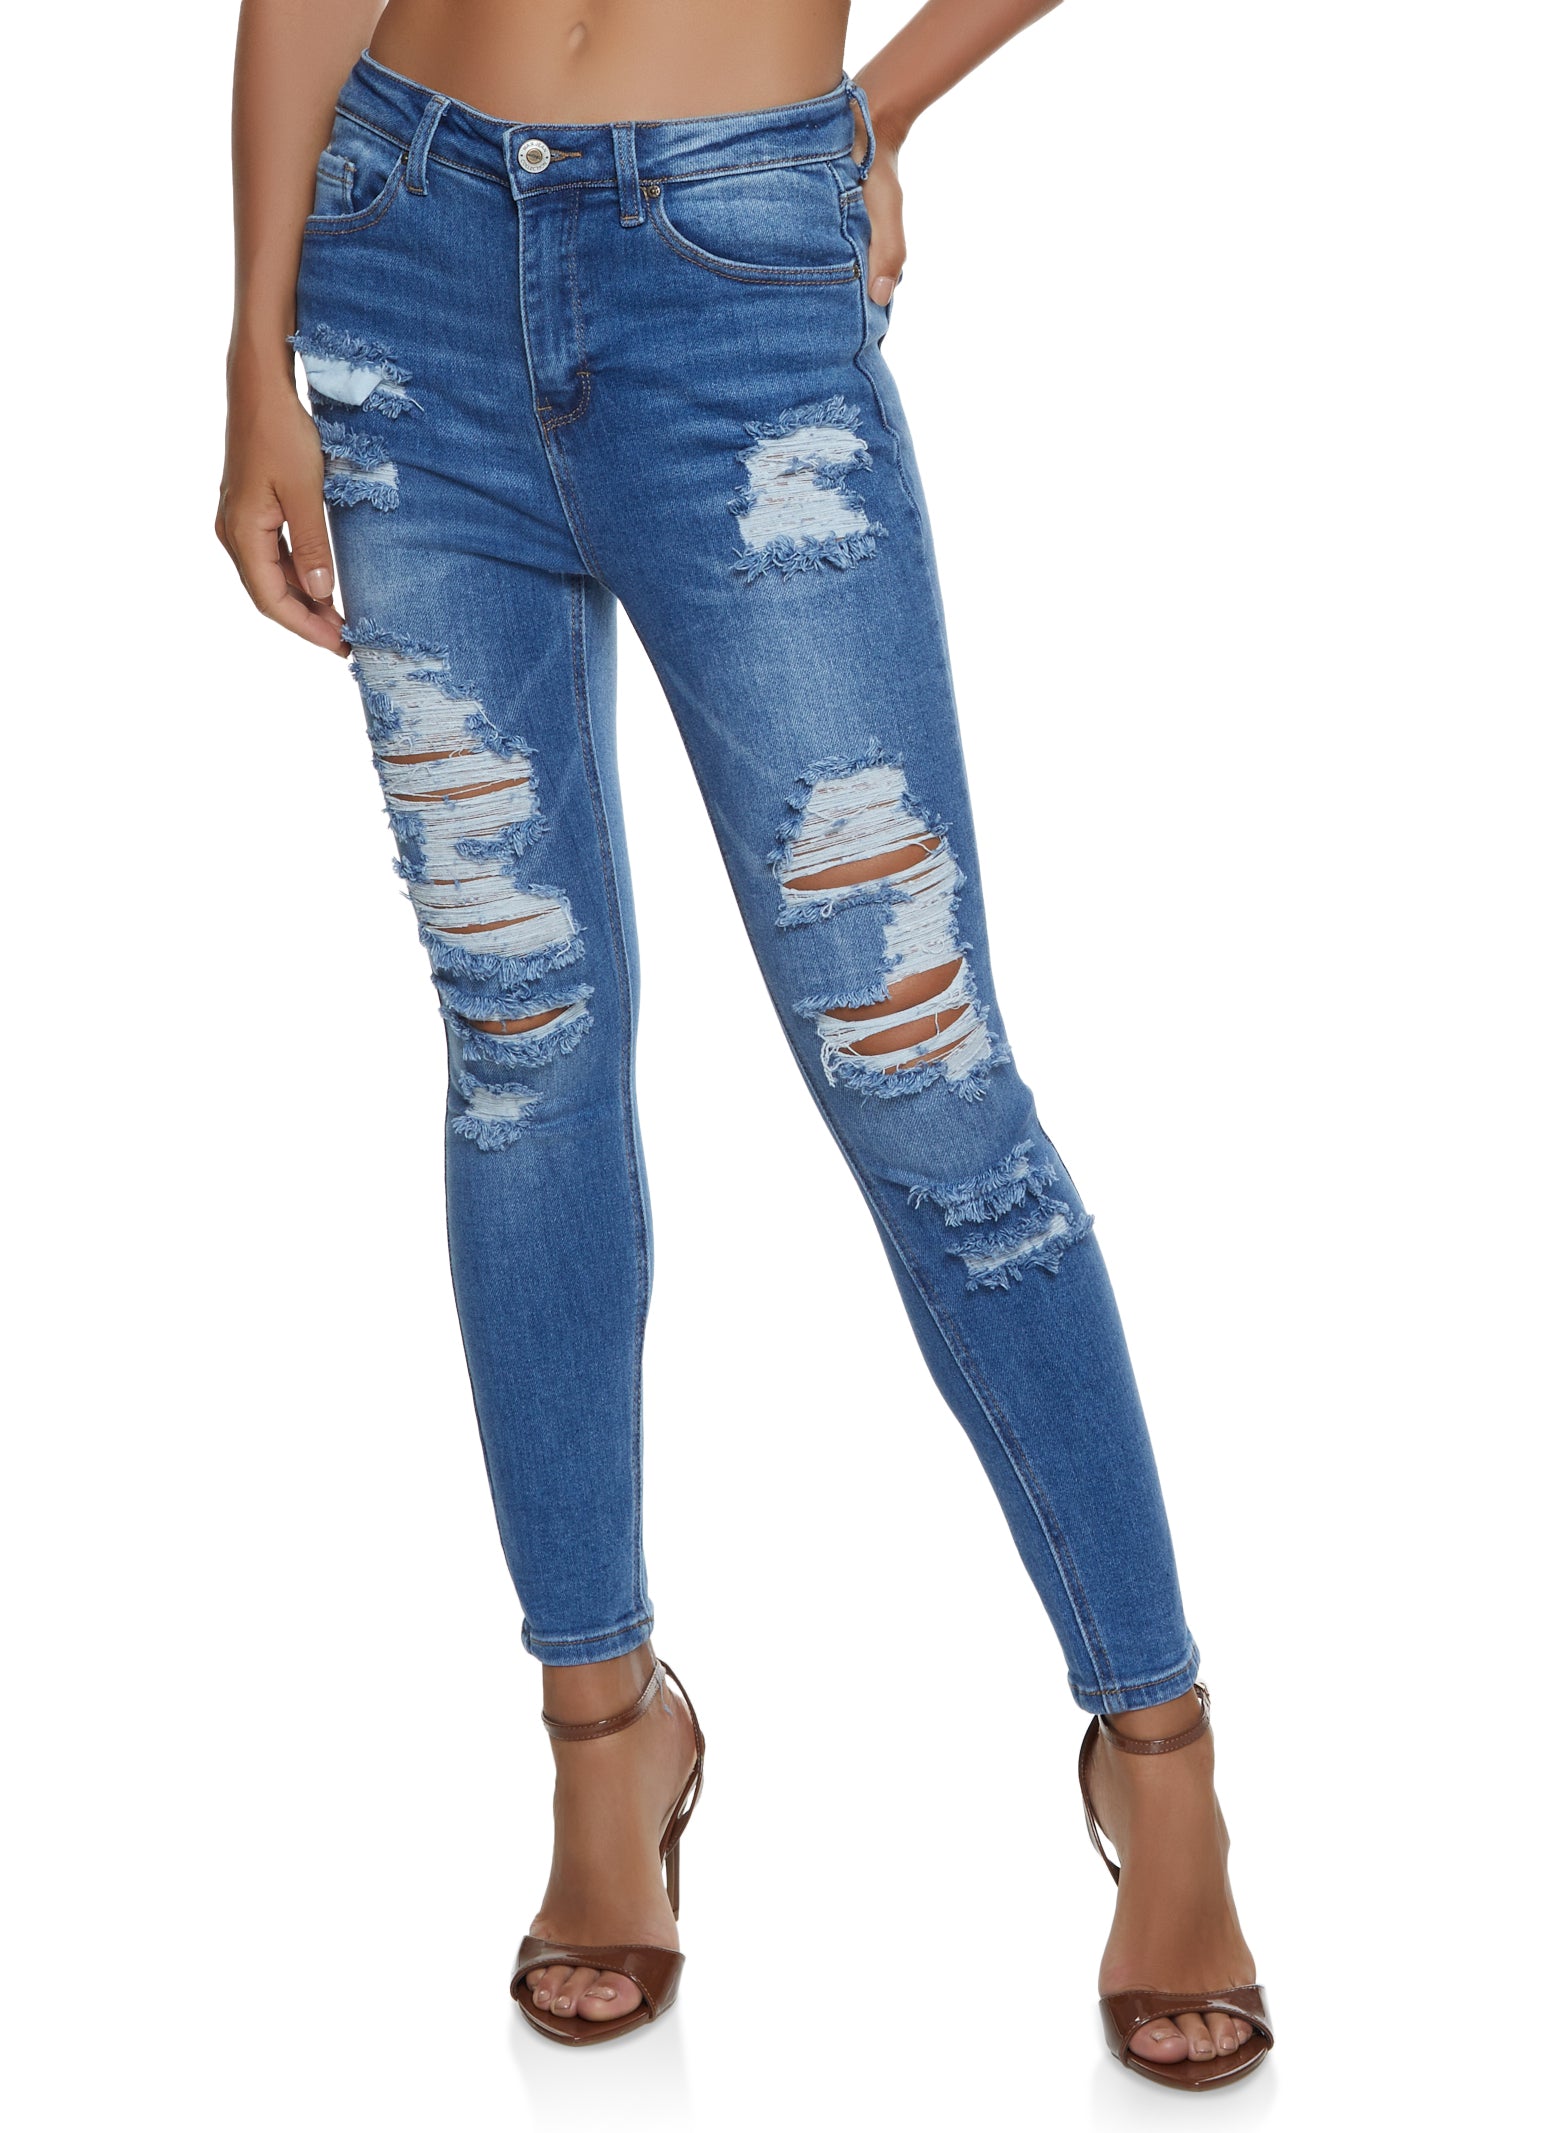 WAX Distressed Frayed Jeans